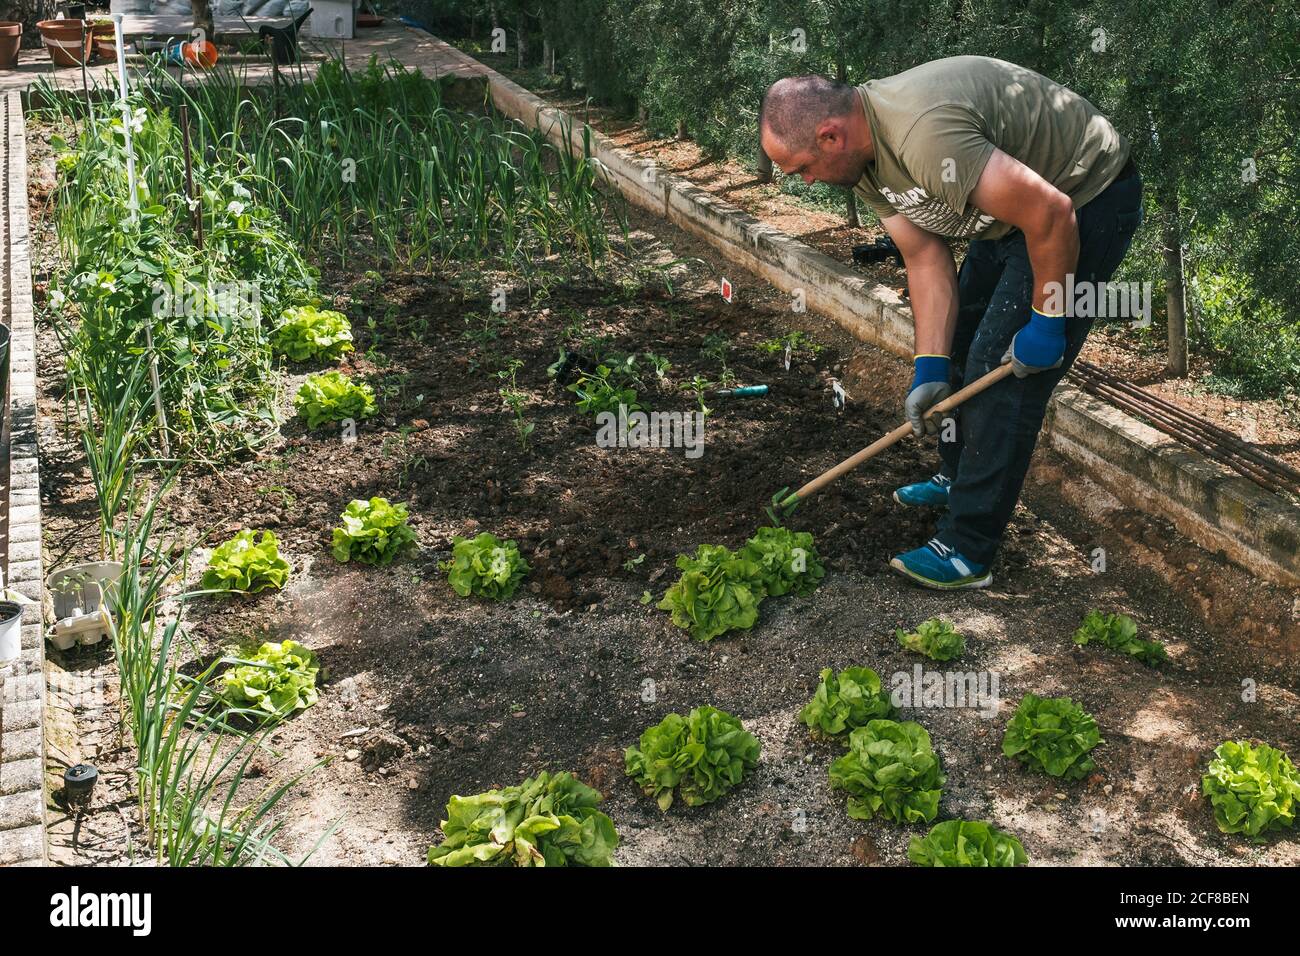 Full body side view of mature male gardener in casual wear and gloves using gardening hoe for cultivating soil around green plants while working in garden in sunny day Stock Photo